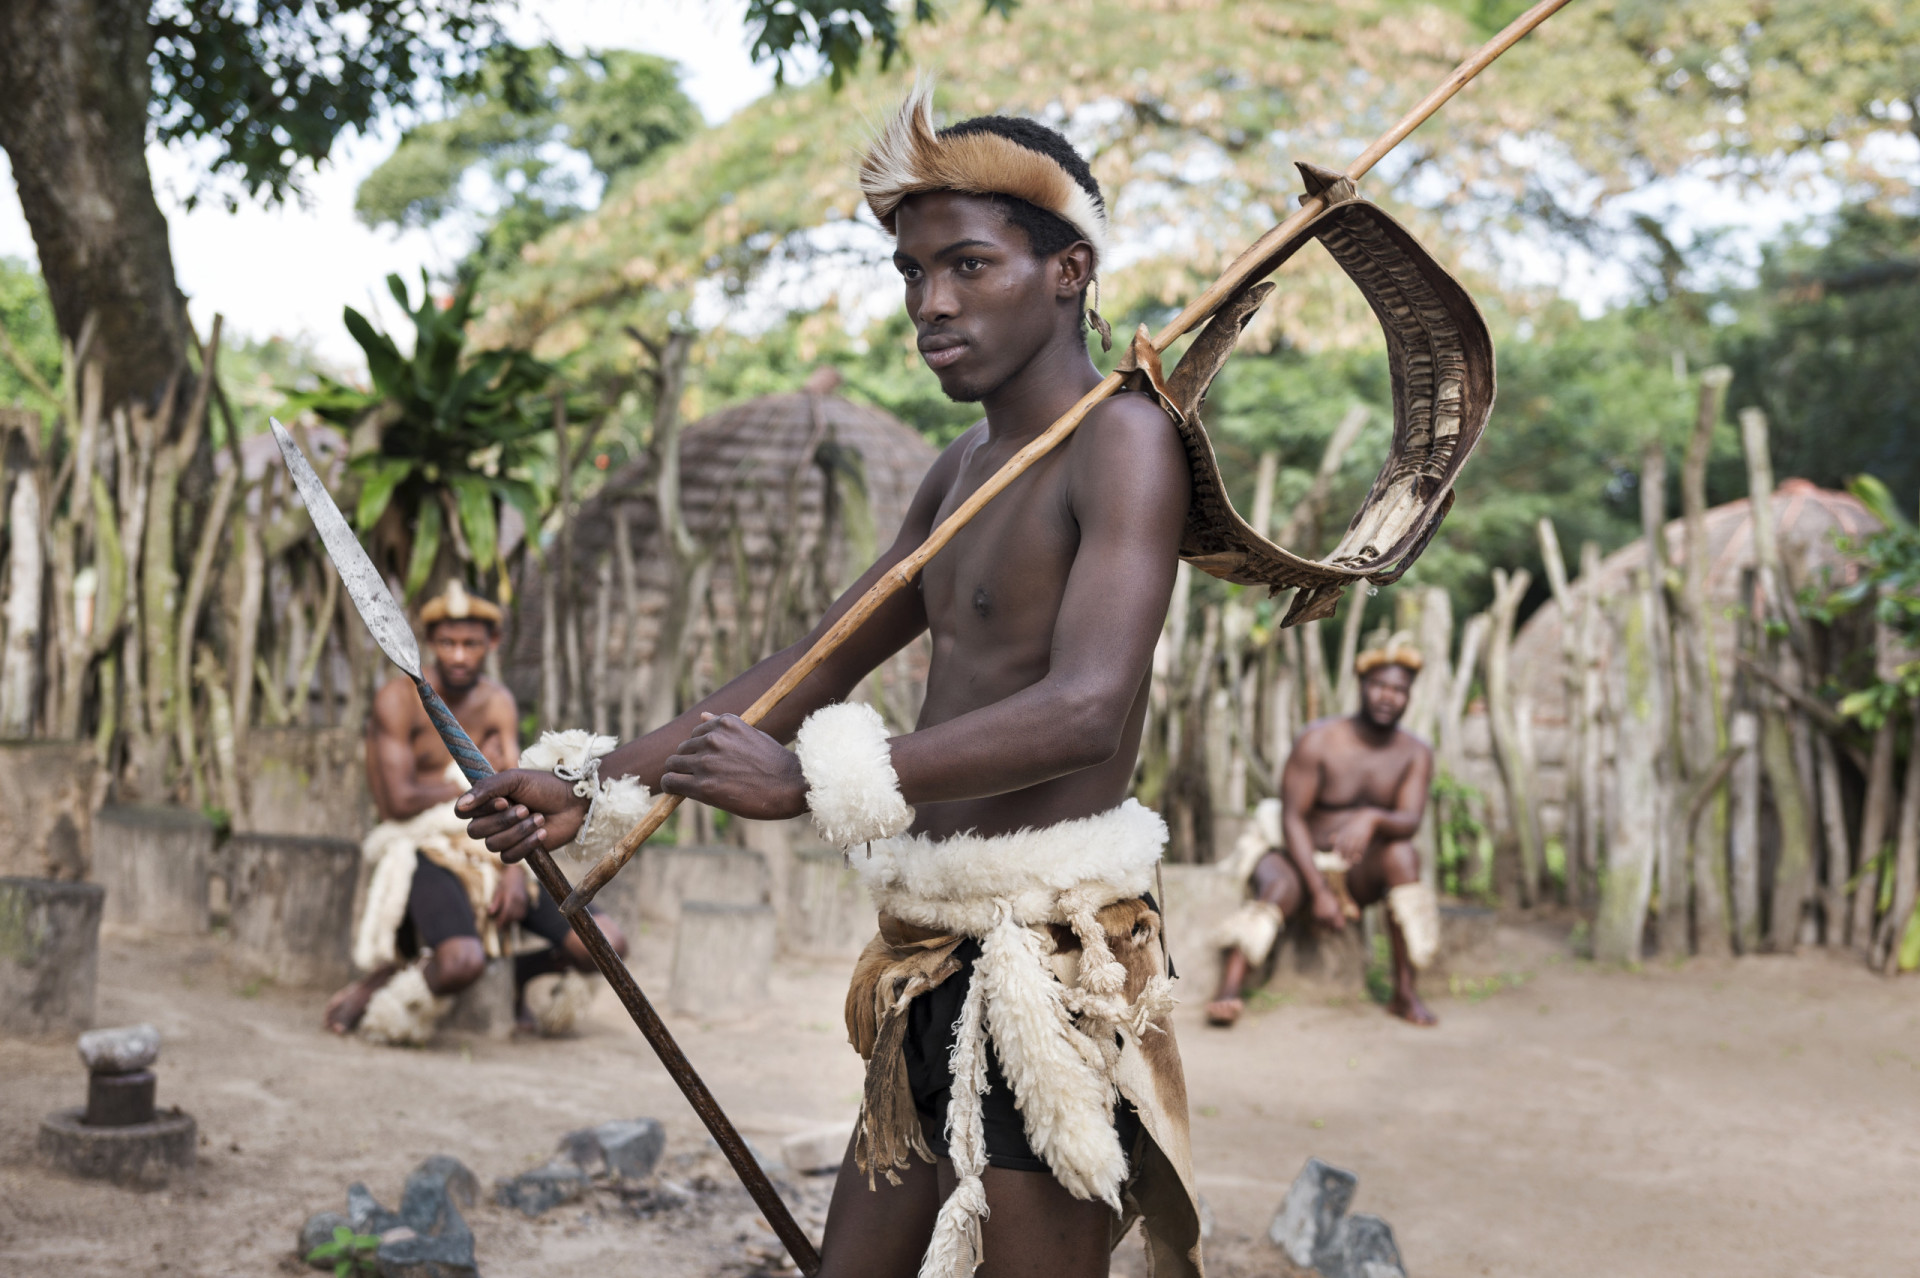 <p>The Zulu people are renowned for their military prowess, which was significantly demonstrated during the Anglo-Zulu War in 1879. Much like other cultures, they also have a rich oral tradition of storytelling.</p> <p>Sources: (Indigenous Navigator) (Indigenous Peoples of Africa Co-ordinating Committee) (International Work Group for Indigenous Affairs)</p> <p>See also: <a href="https://www.starsinsider.com/travel/157635/indigenous-cultural-practices-that-remain-in-use-today">Indigenous cultural practices that remain in use today</a></p>